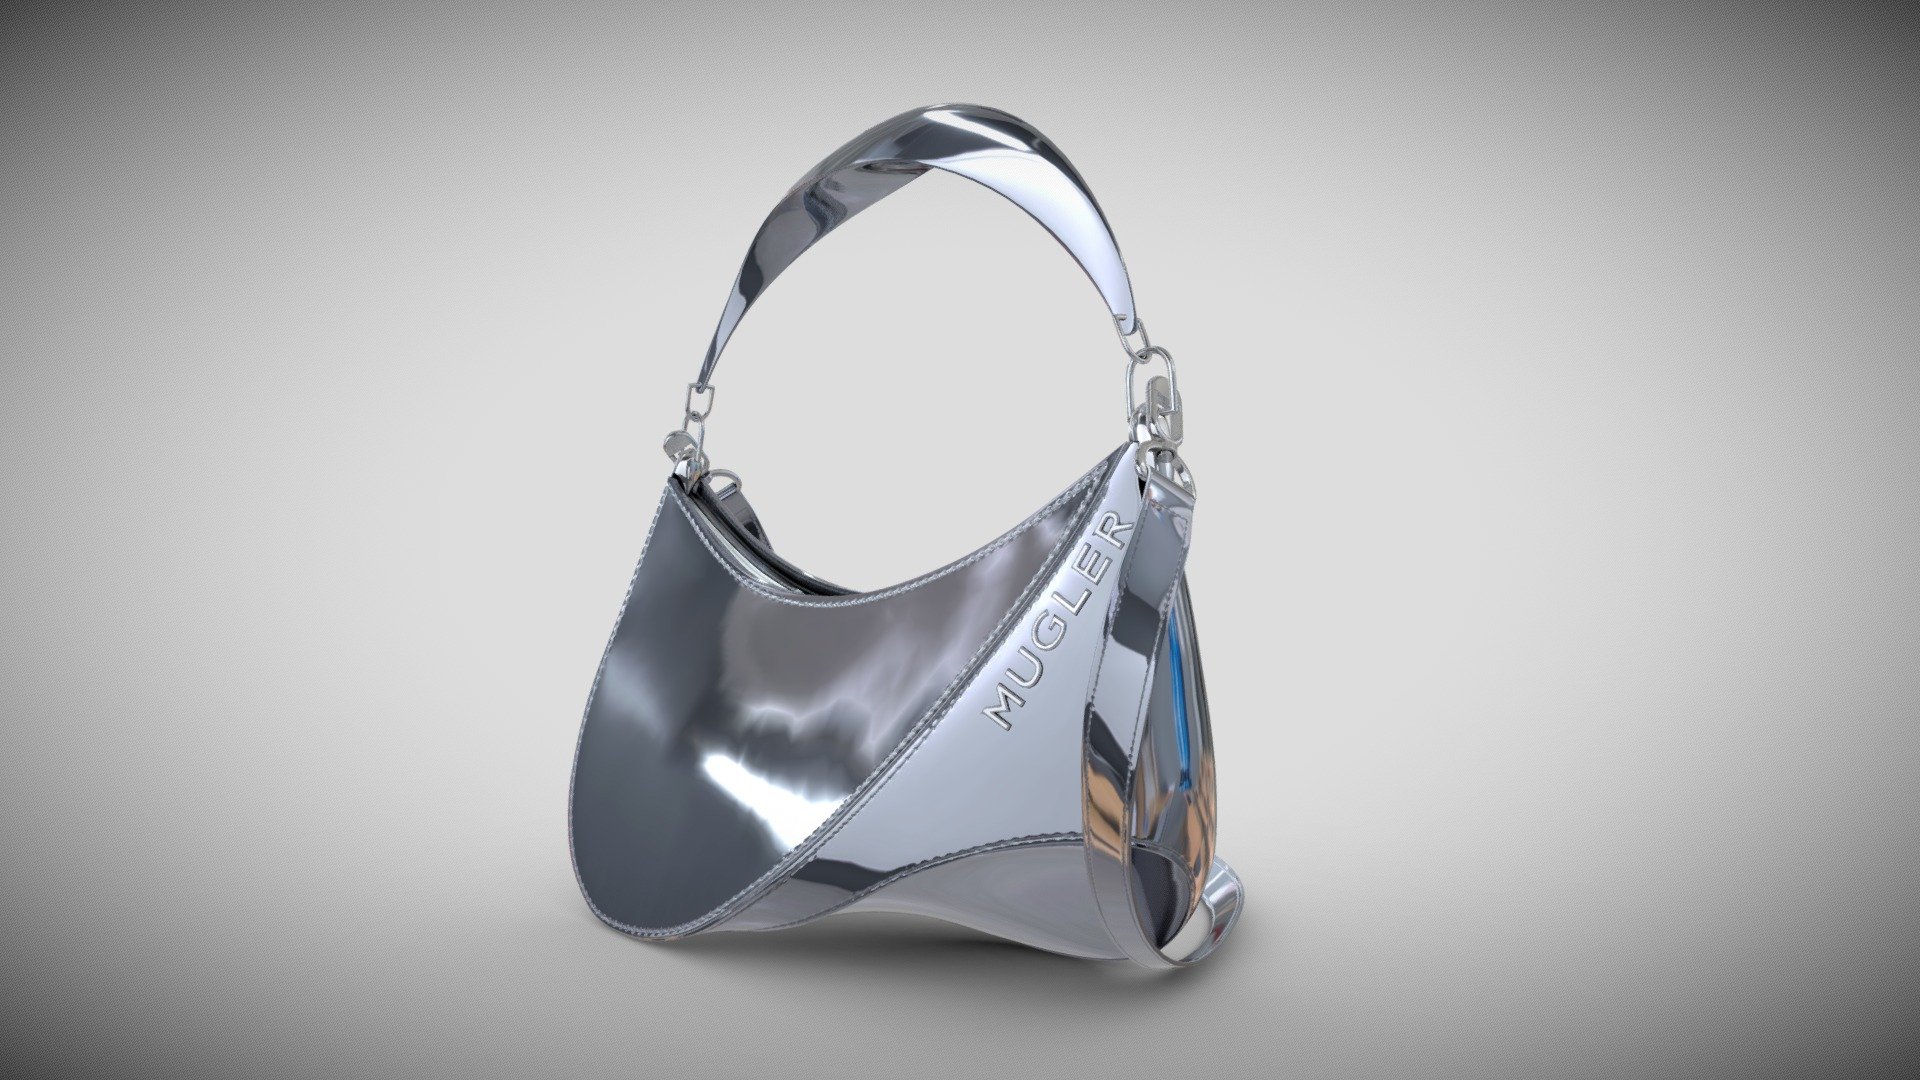 Elevate your style with the exquisite Mugler Handbag—a pinnacle of high fashion. Crafted from luxurious leather and partially recycled aluminum, it boasts a silver metal logo and hardware. The zip closure secures your essentials, while the microsuede lining, made from recycled materials, houses an interior pocket for added convenience 3d model